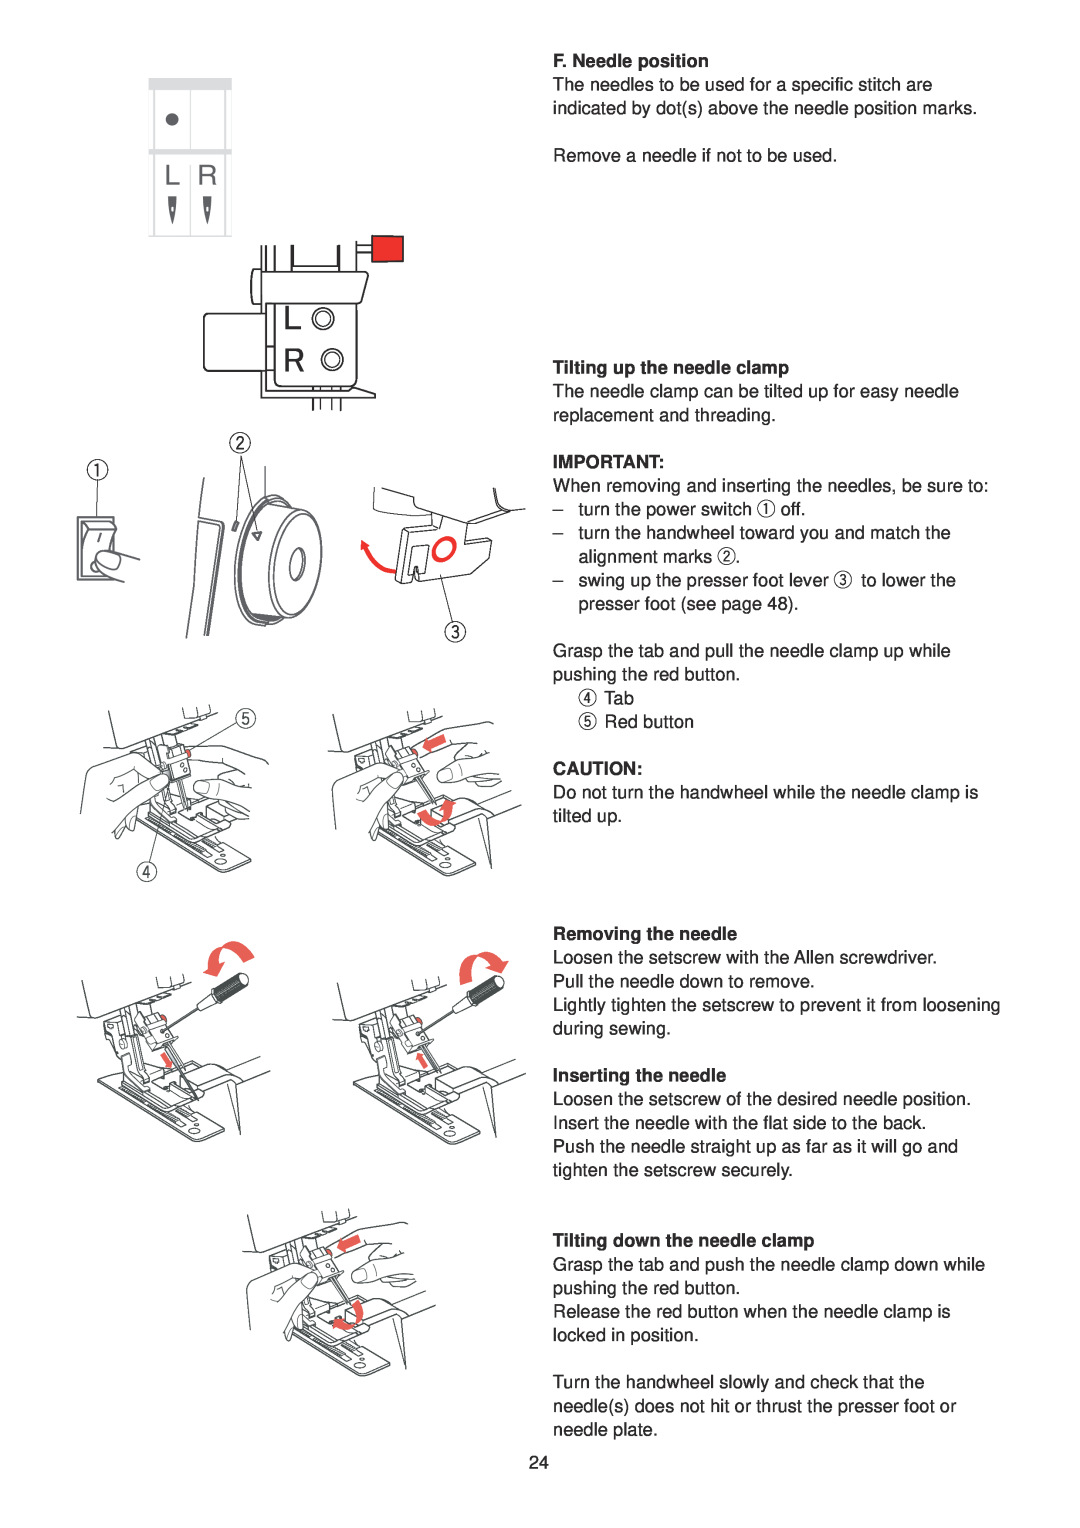 Janome 1100D Professional manual F. Needle position, Tilting up the needle clamp, Removing the needle, Inserting the needle 